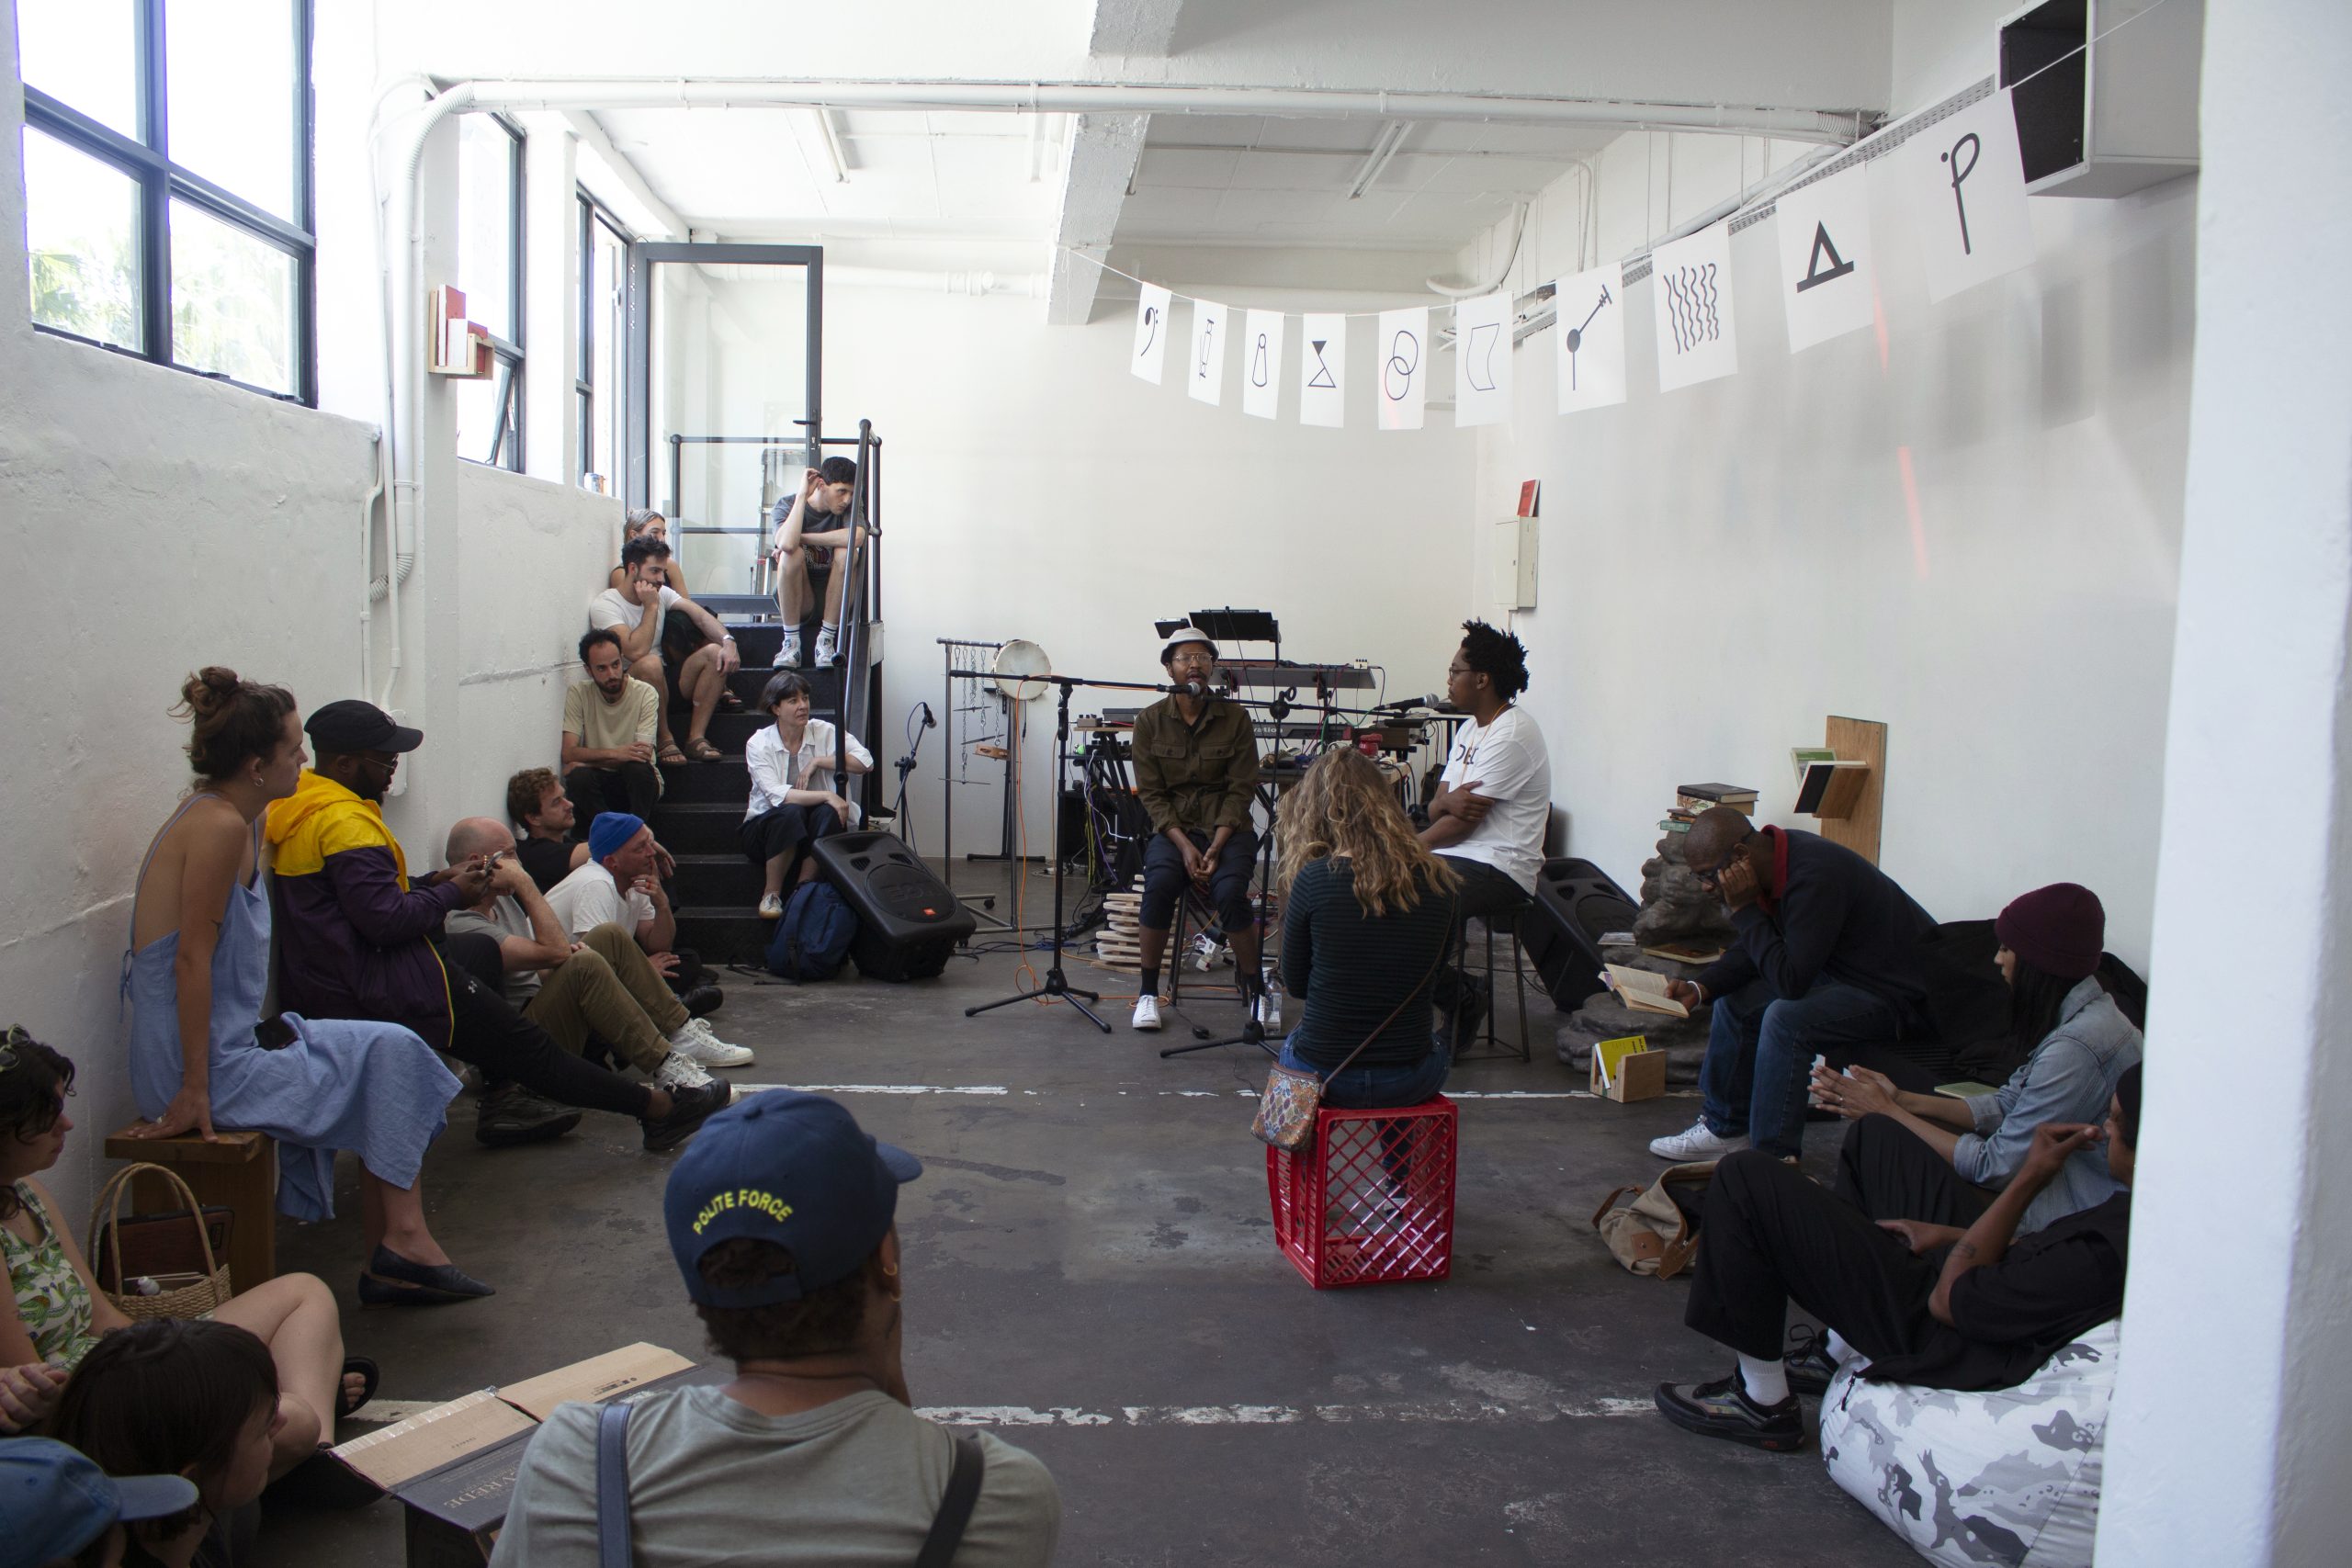 People gathered to witness Dead Symbols at Under Projects. (Image courtesy of Under Projects)